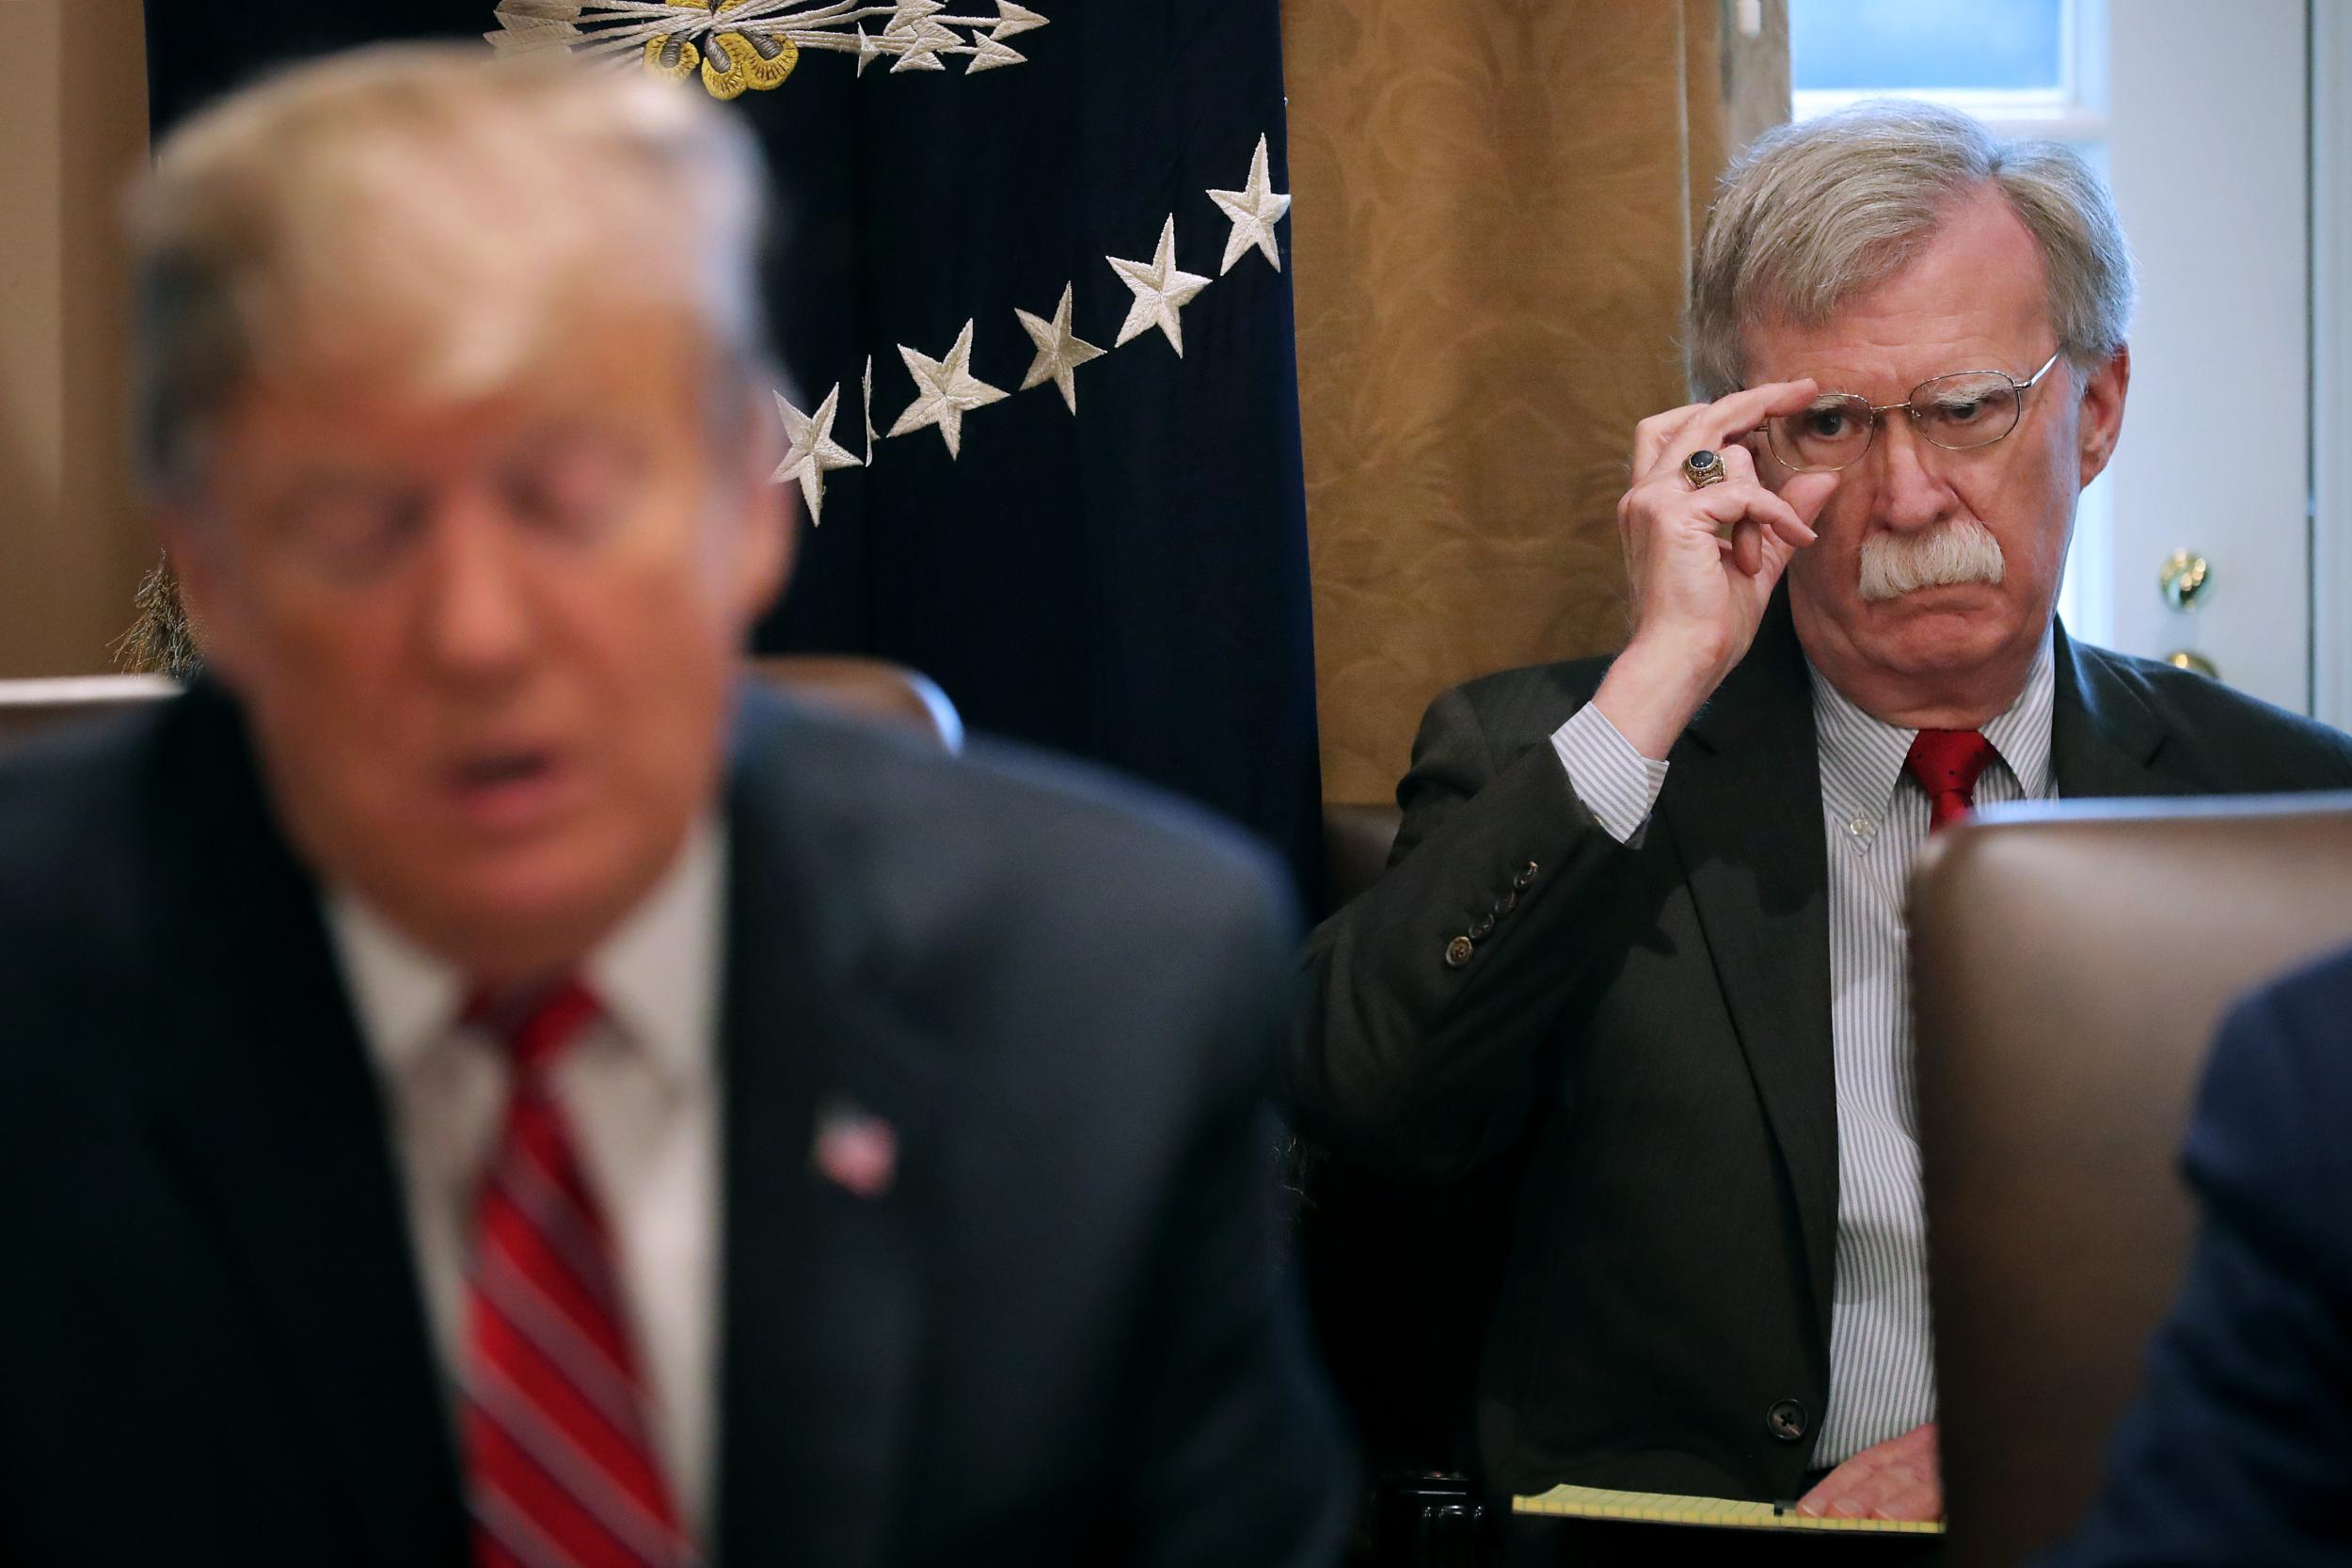 Whatever you think of John Bolton, his departure is a bad sign